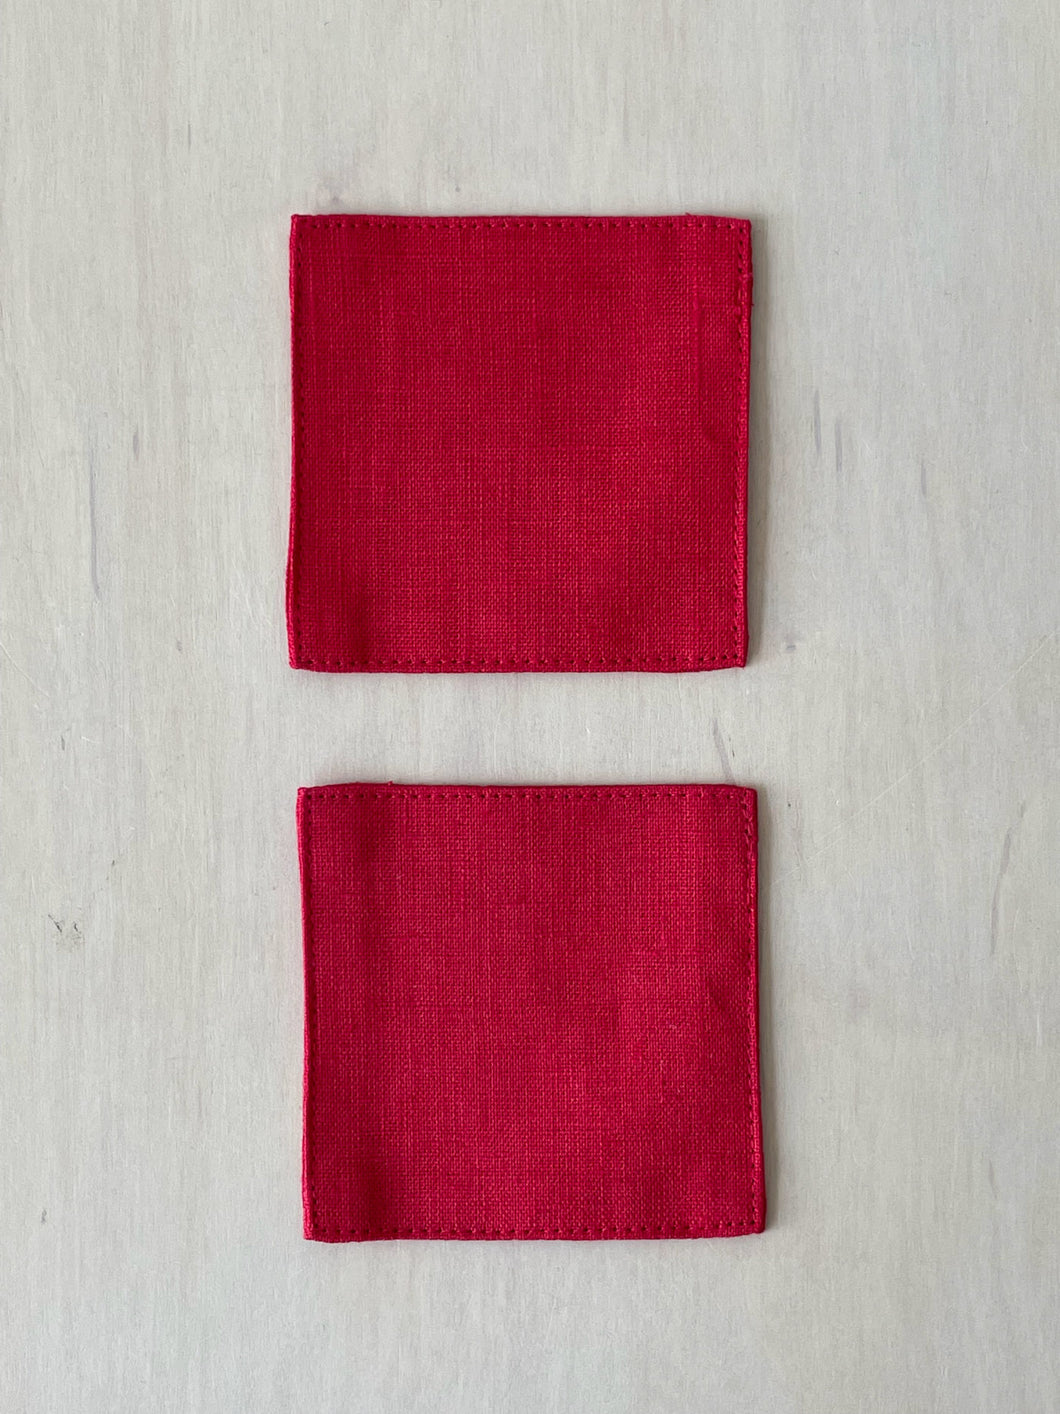 Linen Coaster Set of 4 in Red